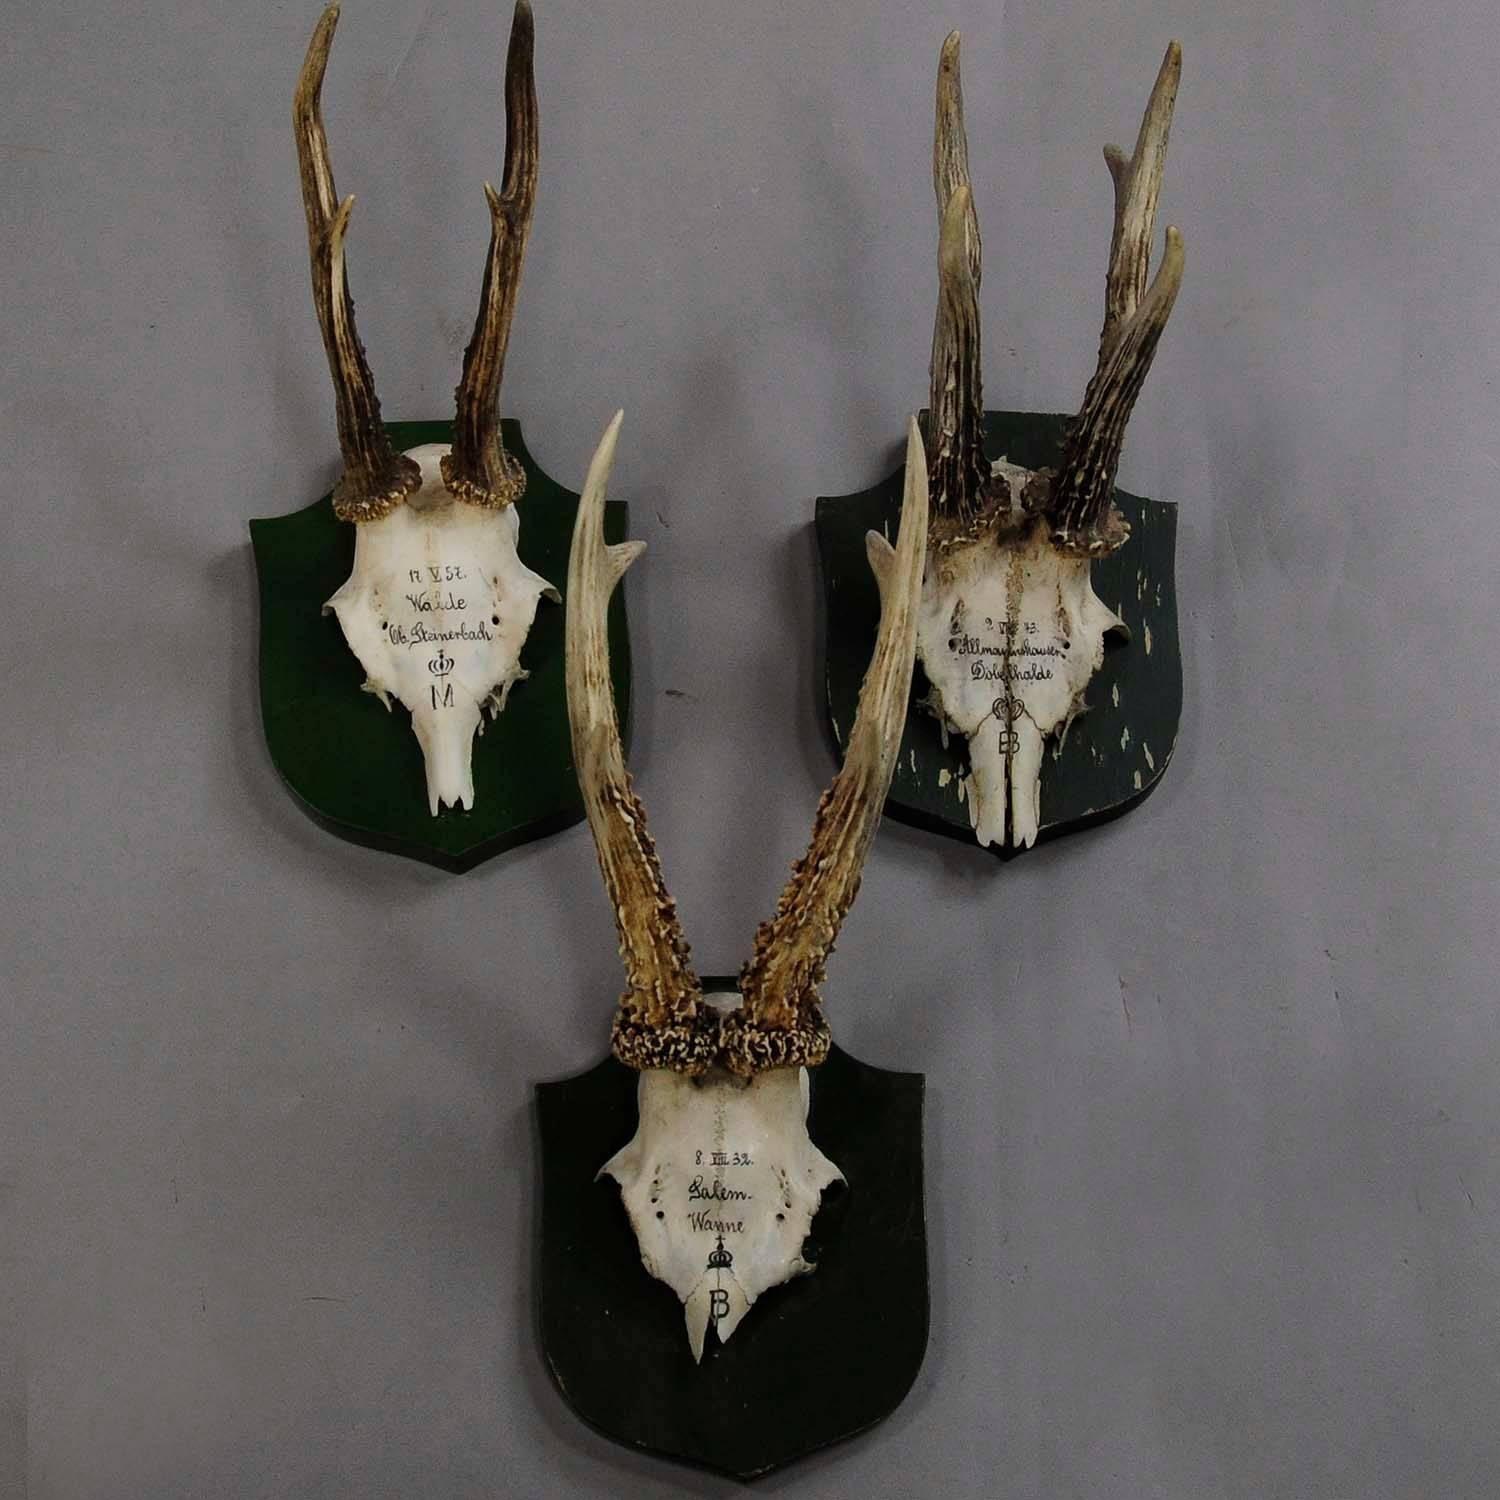 A set of six antique black forest deer trophies on wooden plaques. Remaining from the stately home of palace Salem in South Germany. All trophies were shot by members of the family of margrave Maximilien of Baden. Handwritten inscriptions on the